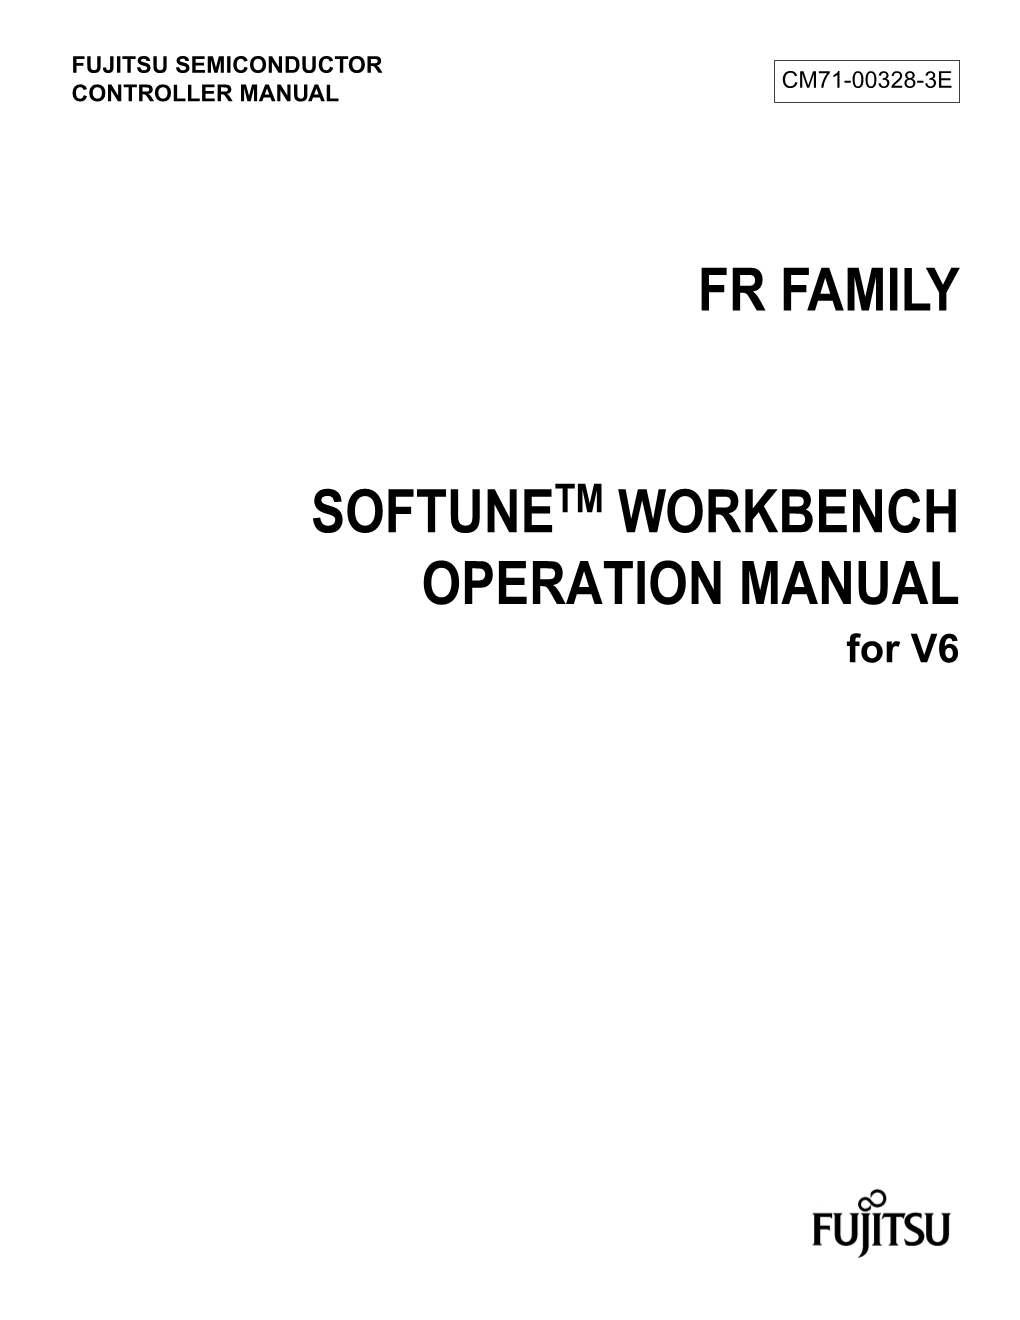 Fr Family Softune Workbench Operation Manual